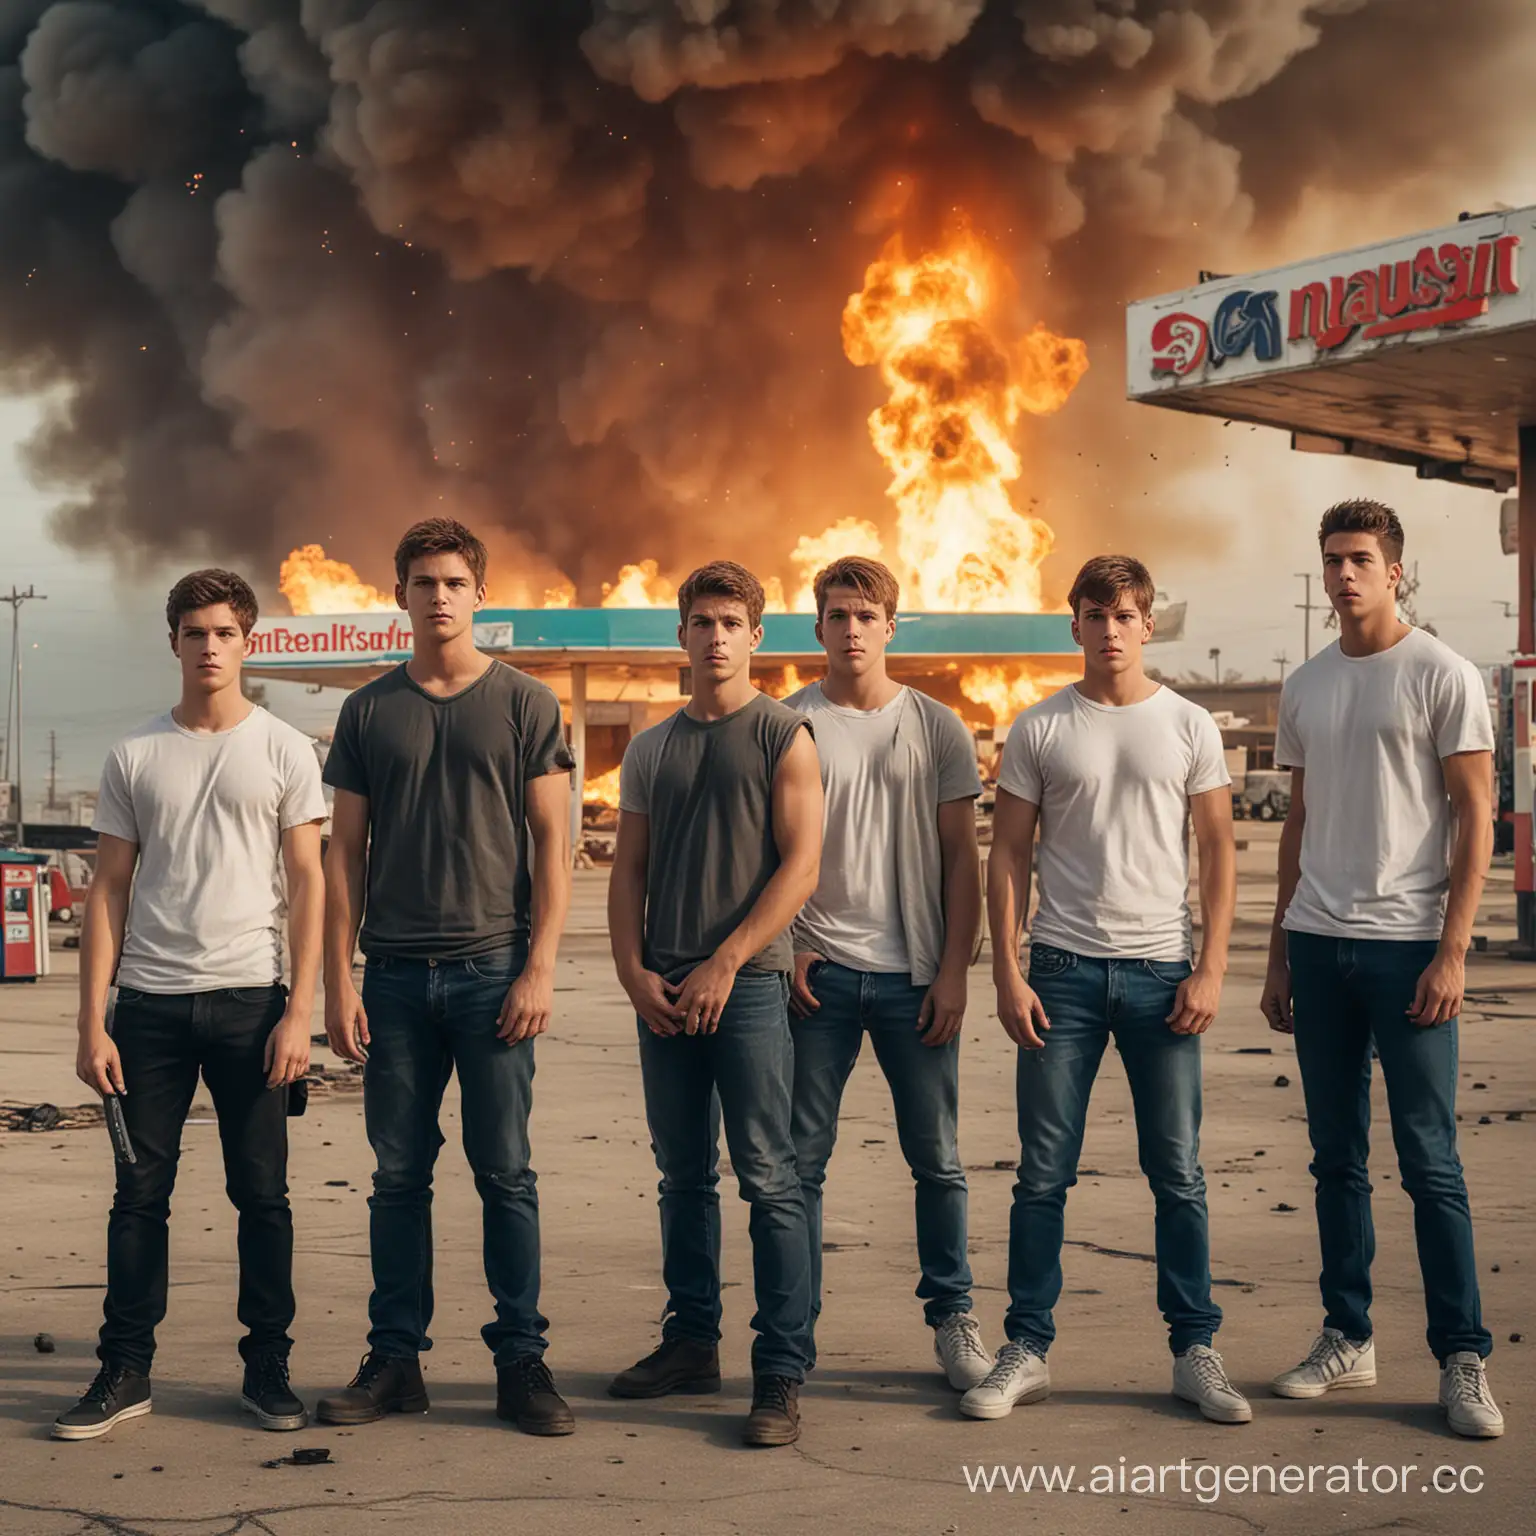 Youthful-Rebels-Pose-Amidst-Exploding-Gas-Station